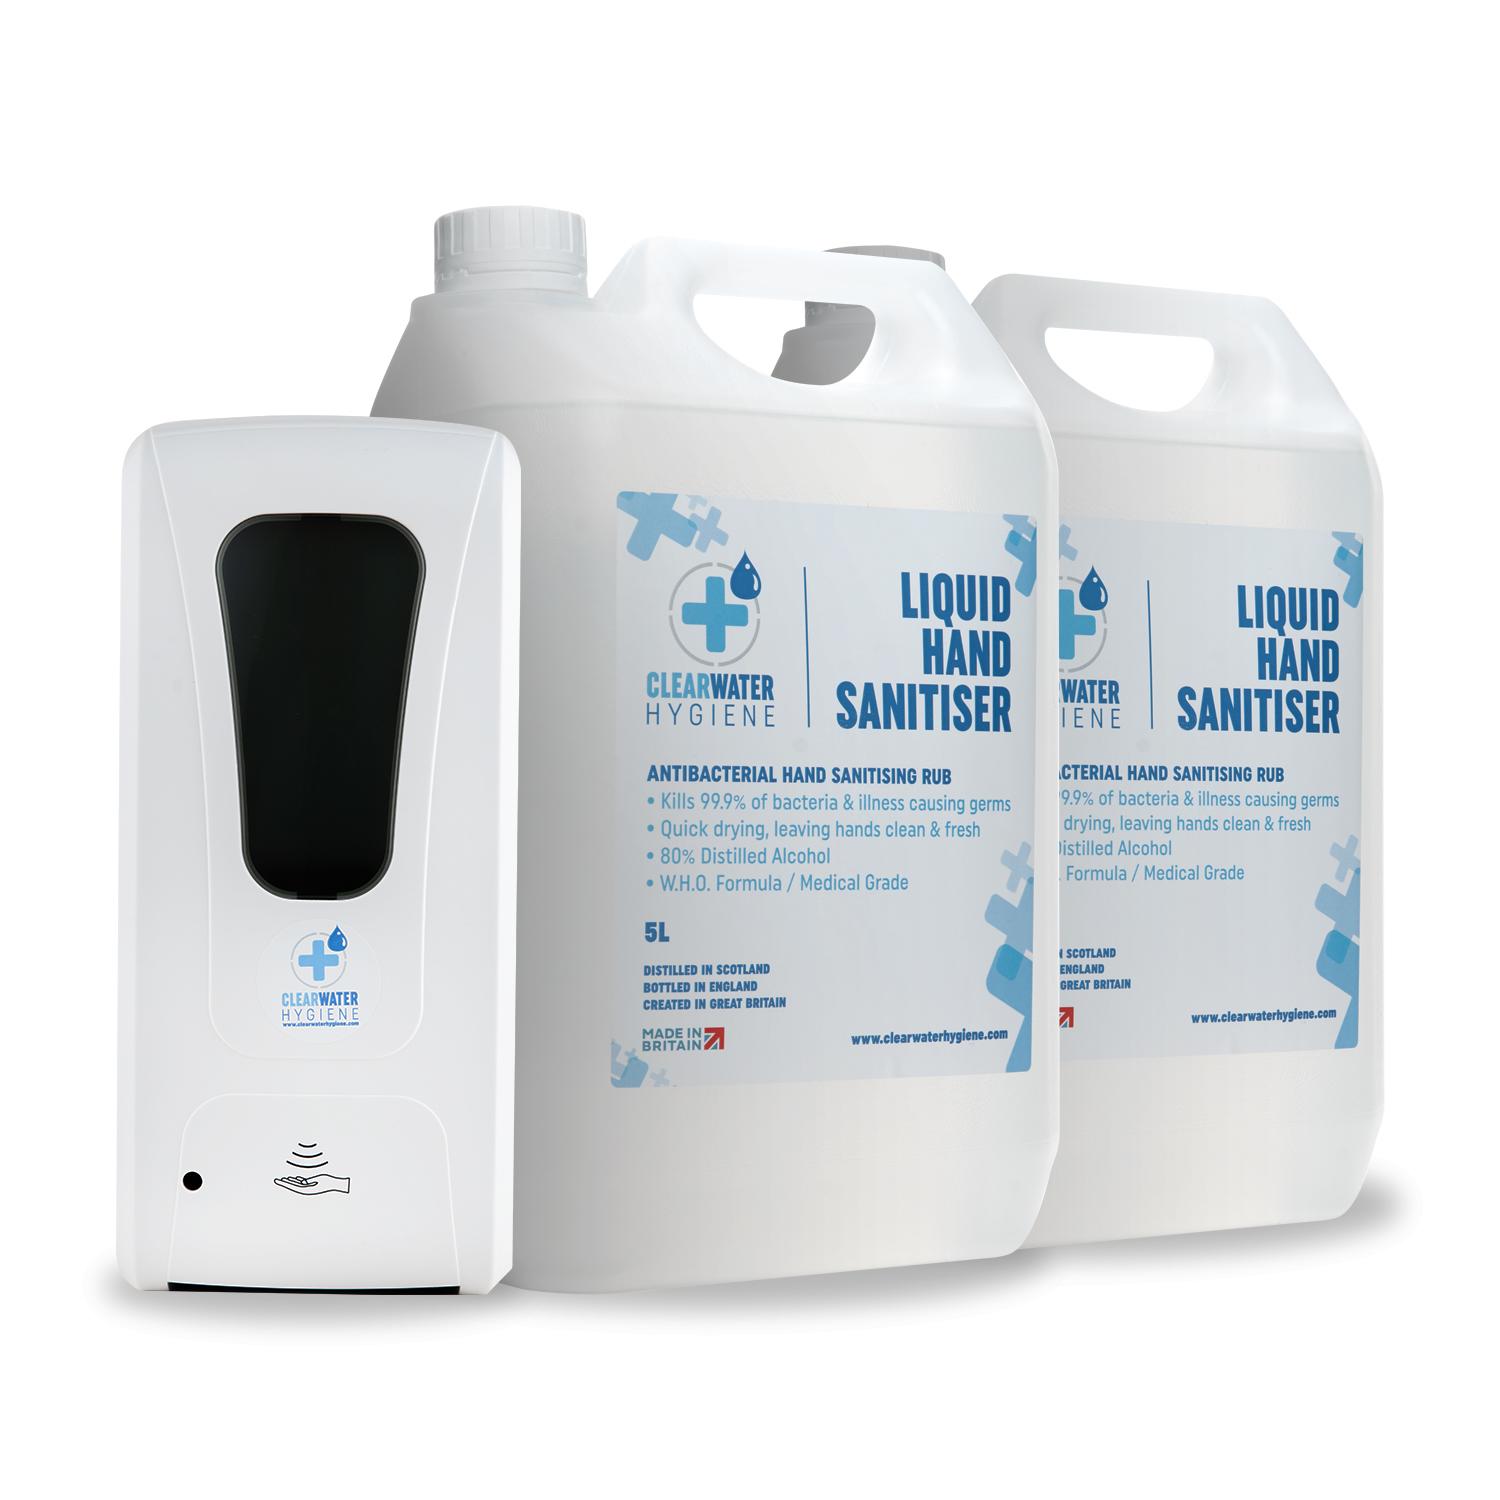 5 litre twin pack and automatic dispenser